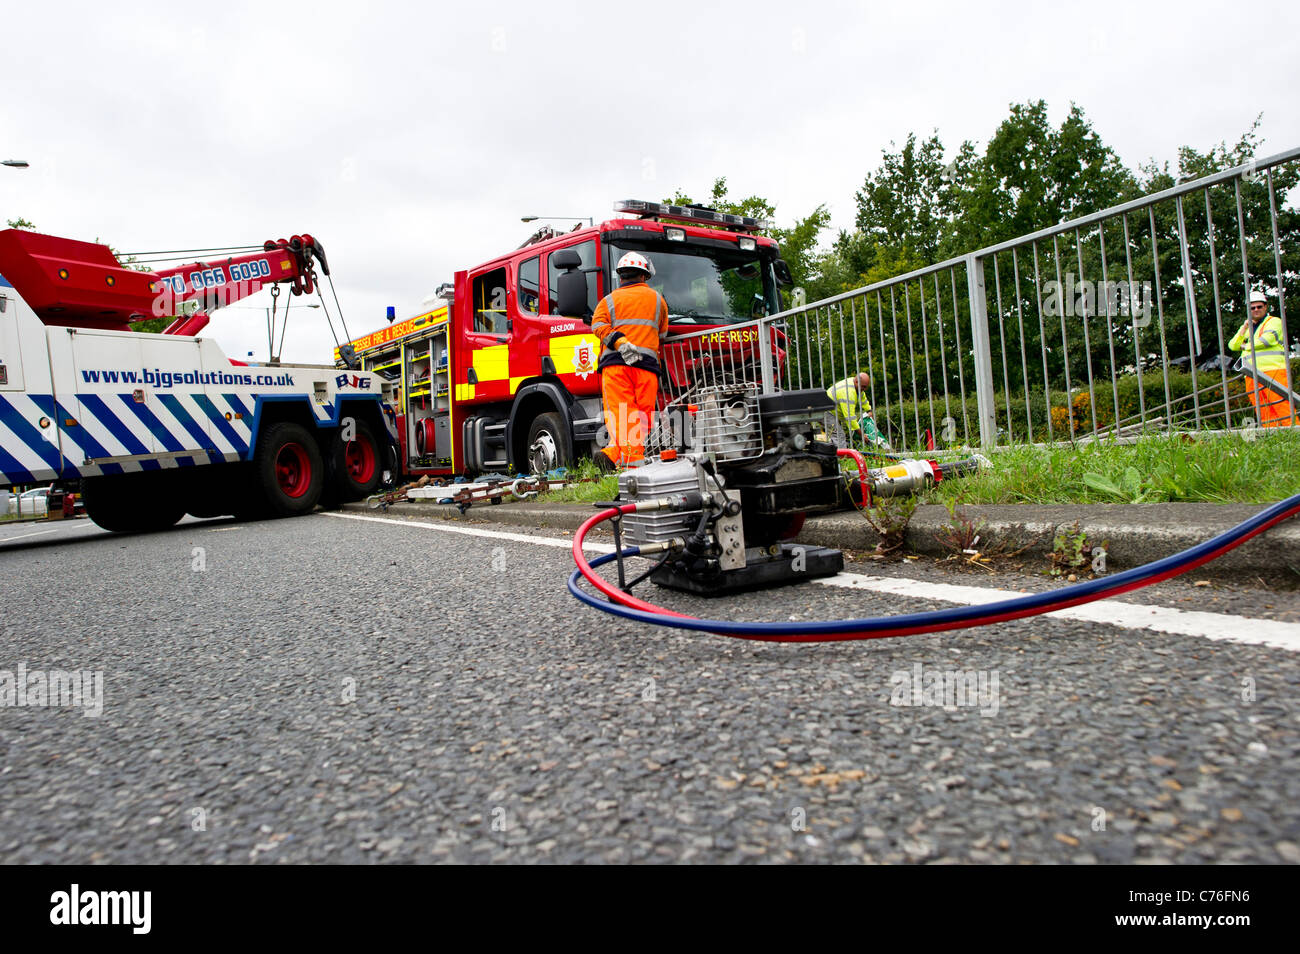 Recovery workers preparing to clear the scene of a serious road accident involving a fire engine and a car. Stock Photo